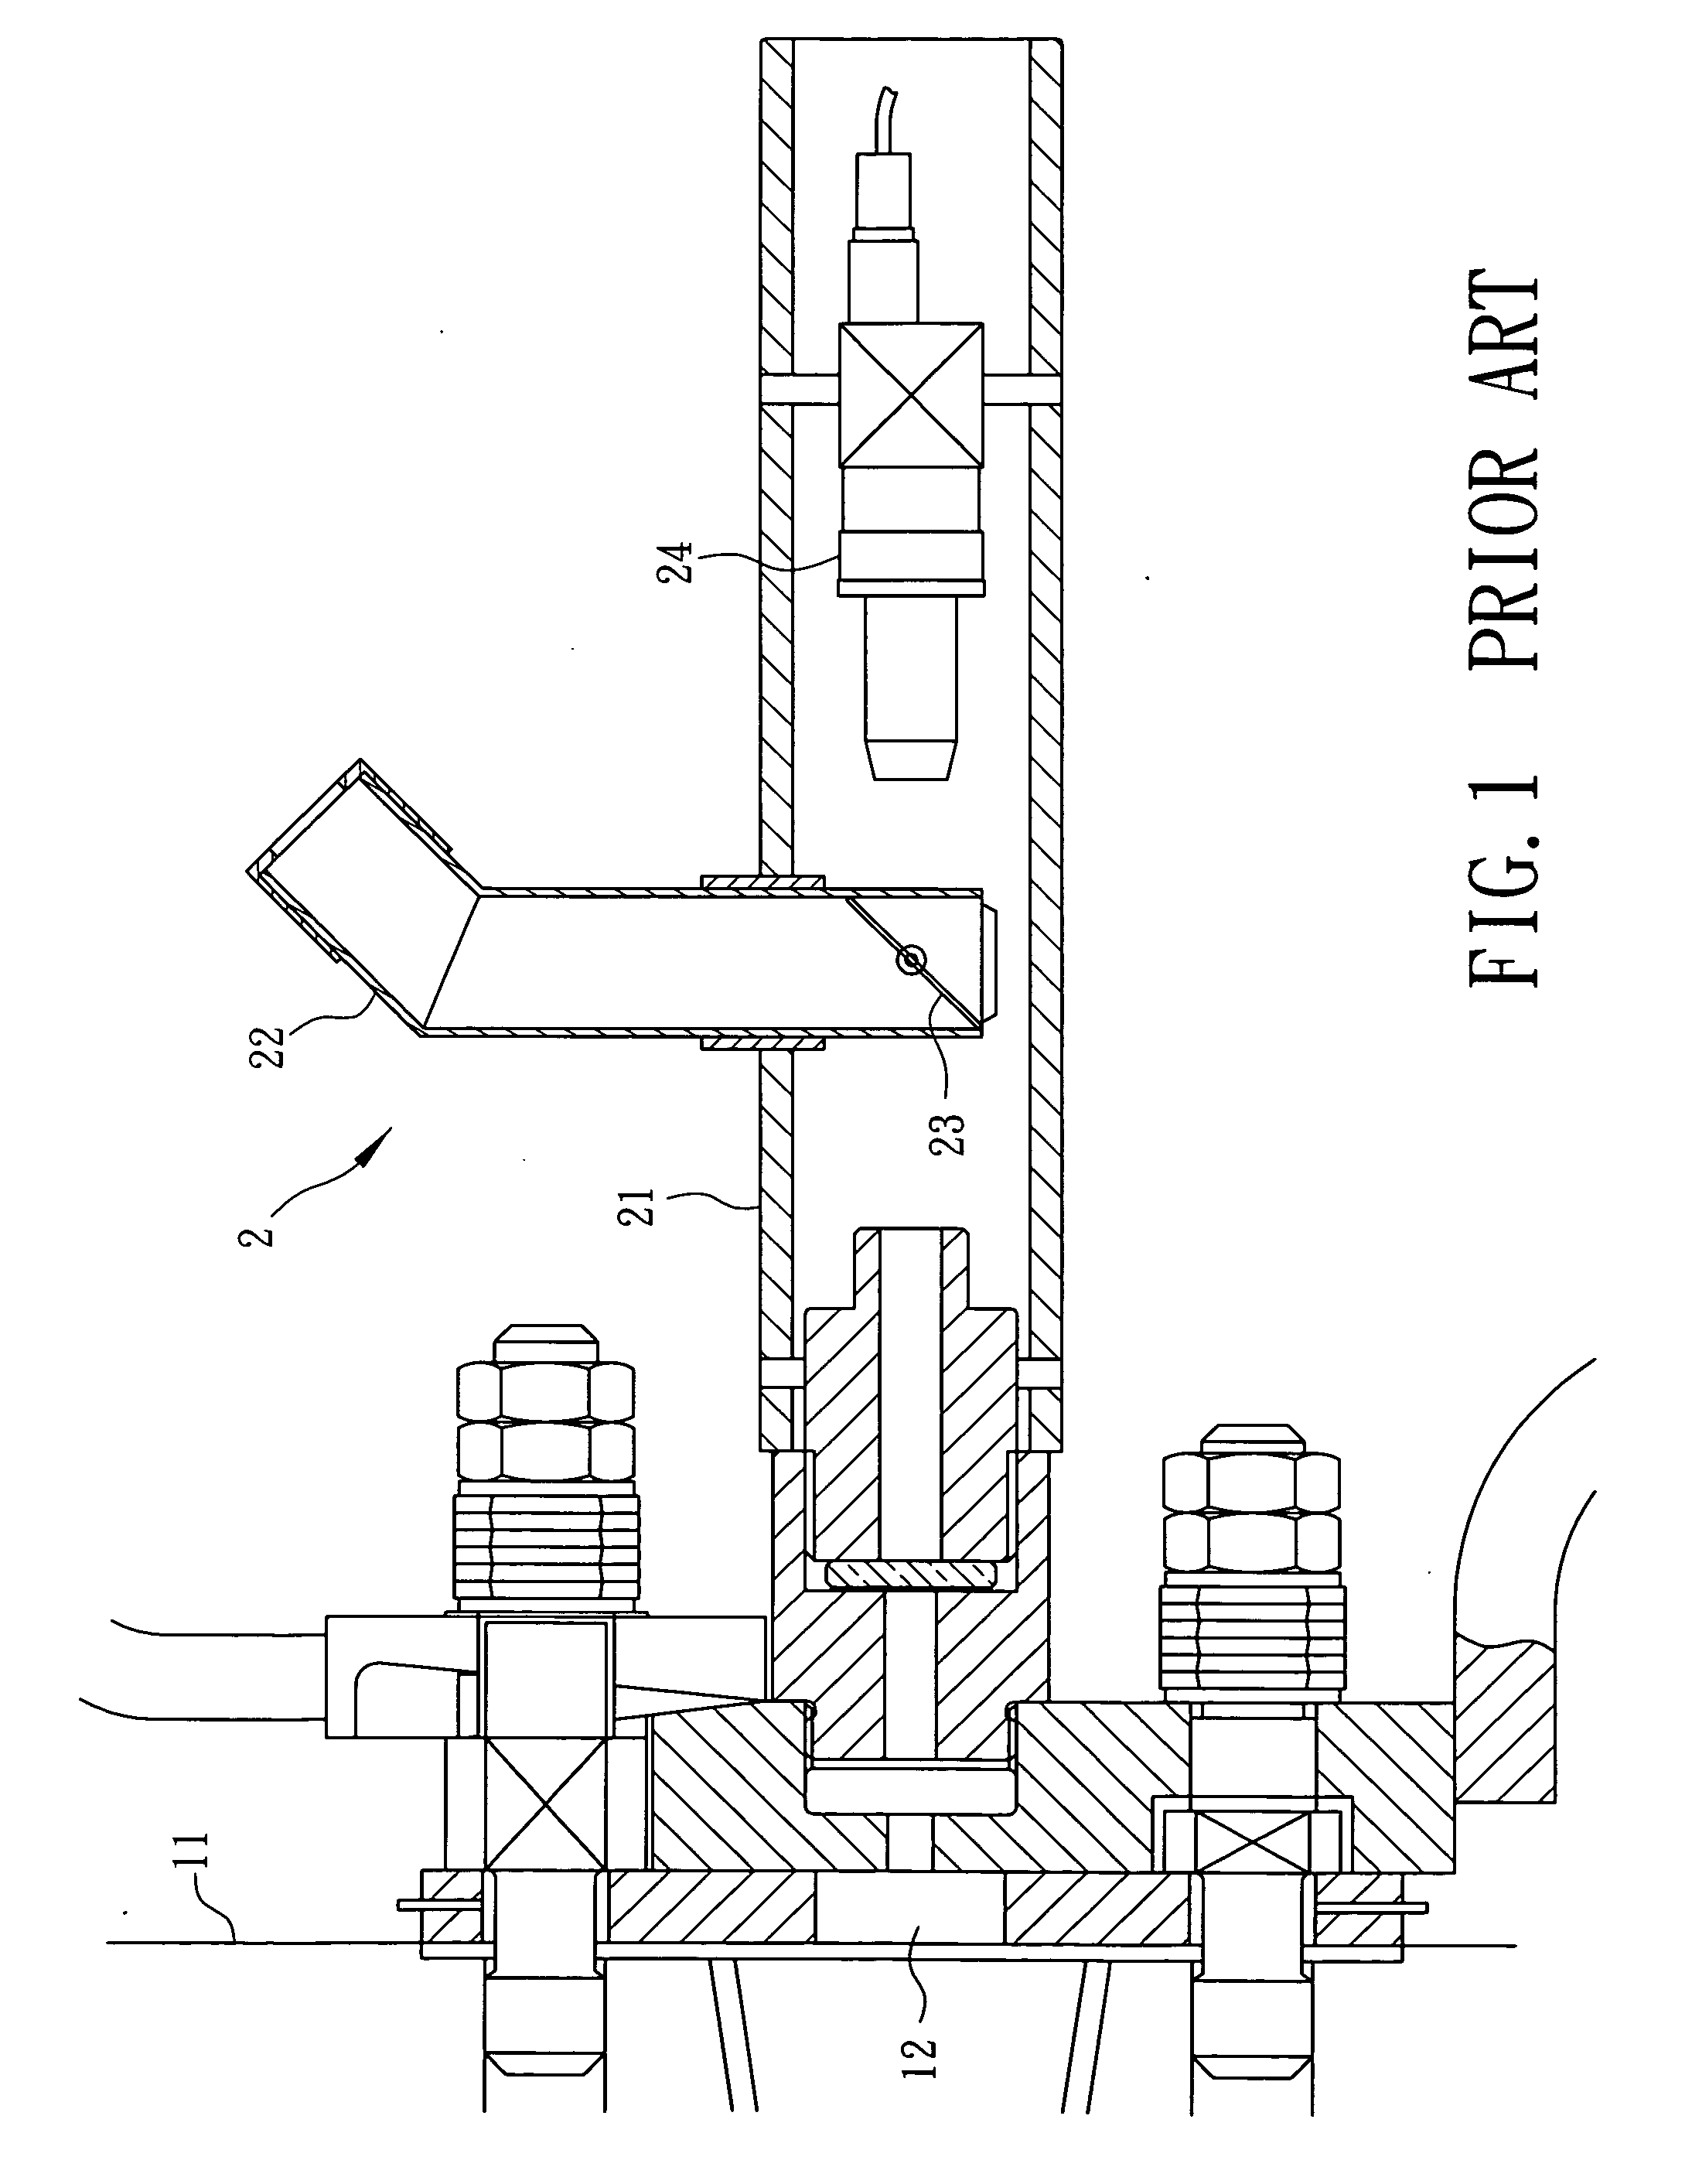 Apparatus for observing interior of a blast furnace system